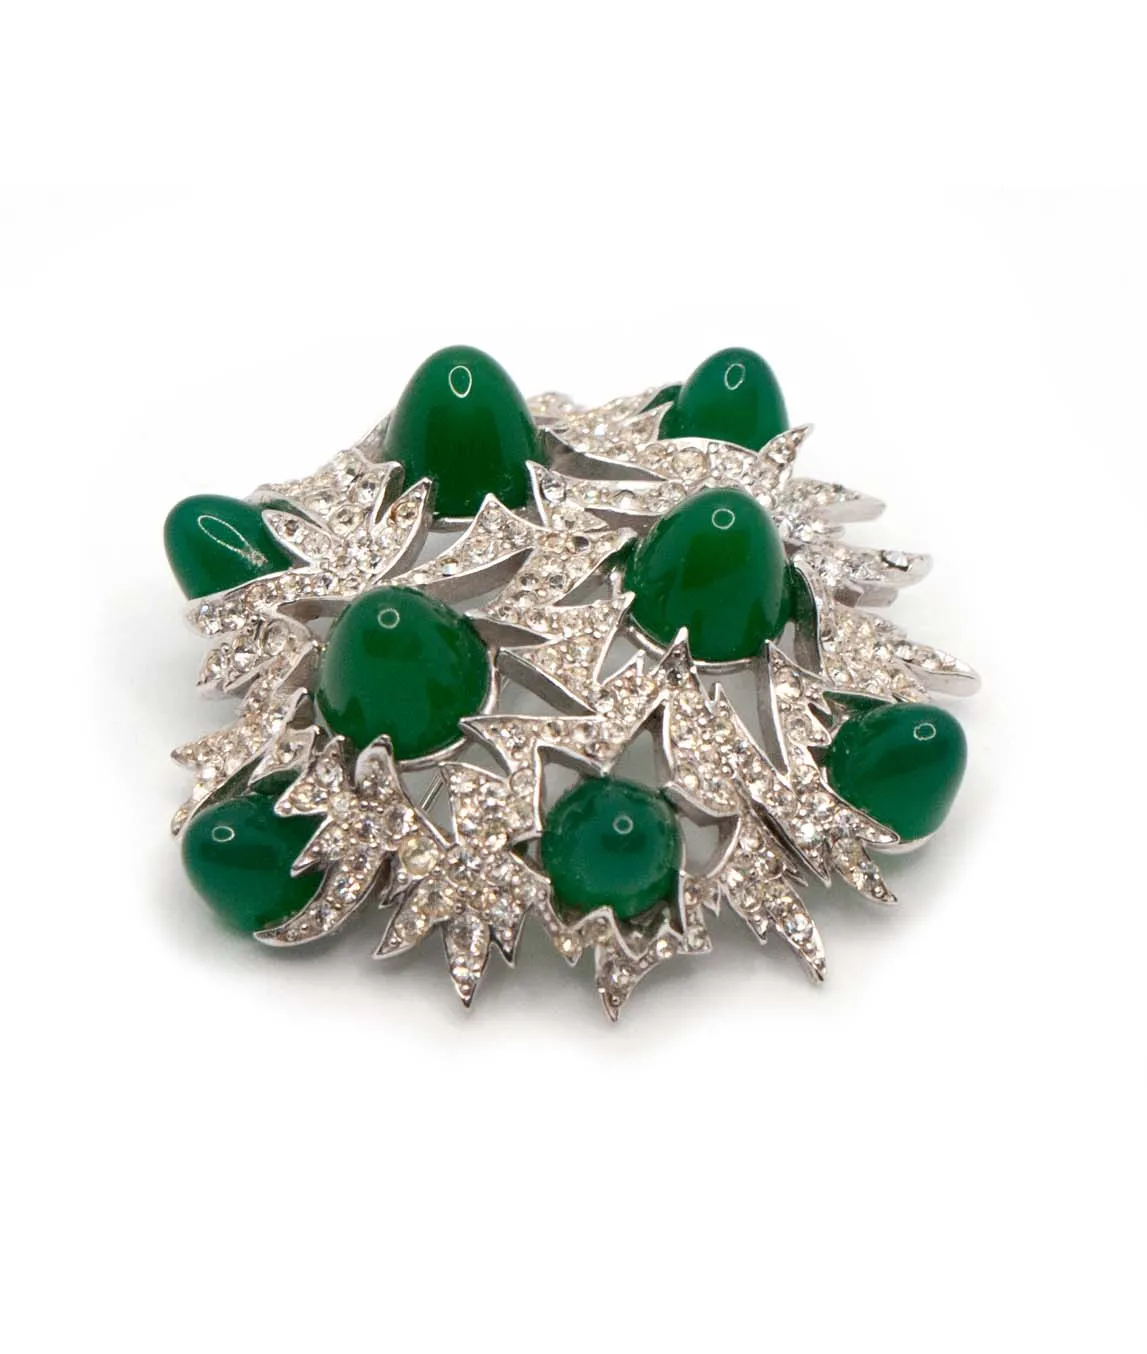 Vintage Marcel Boucher brooch with pavé crystals and green glass cabochons